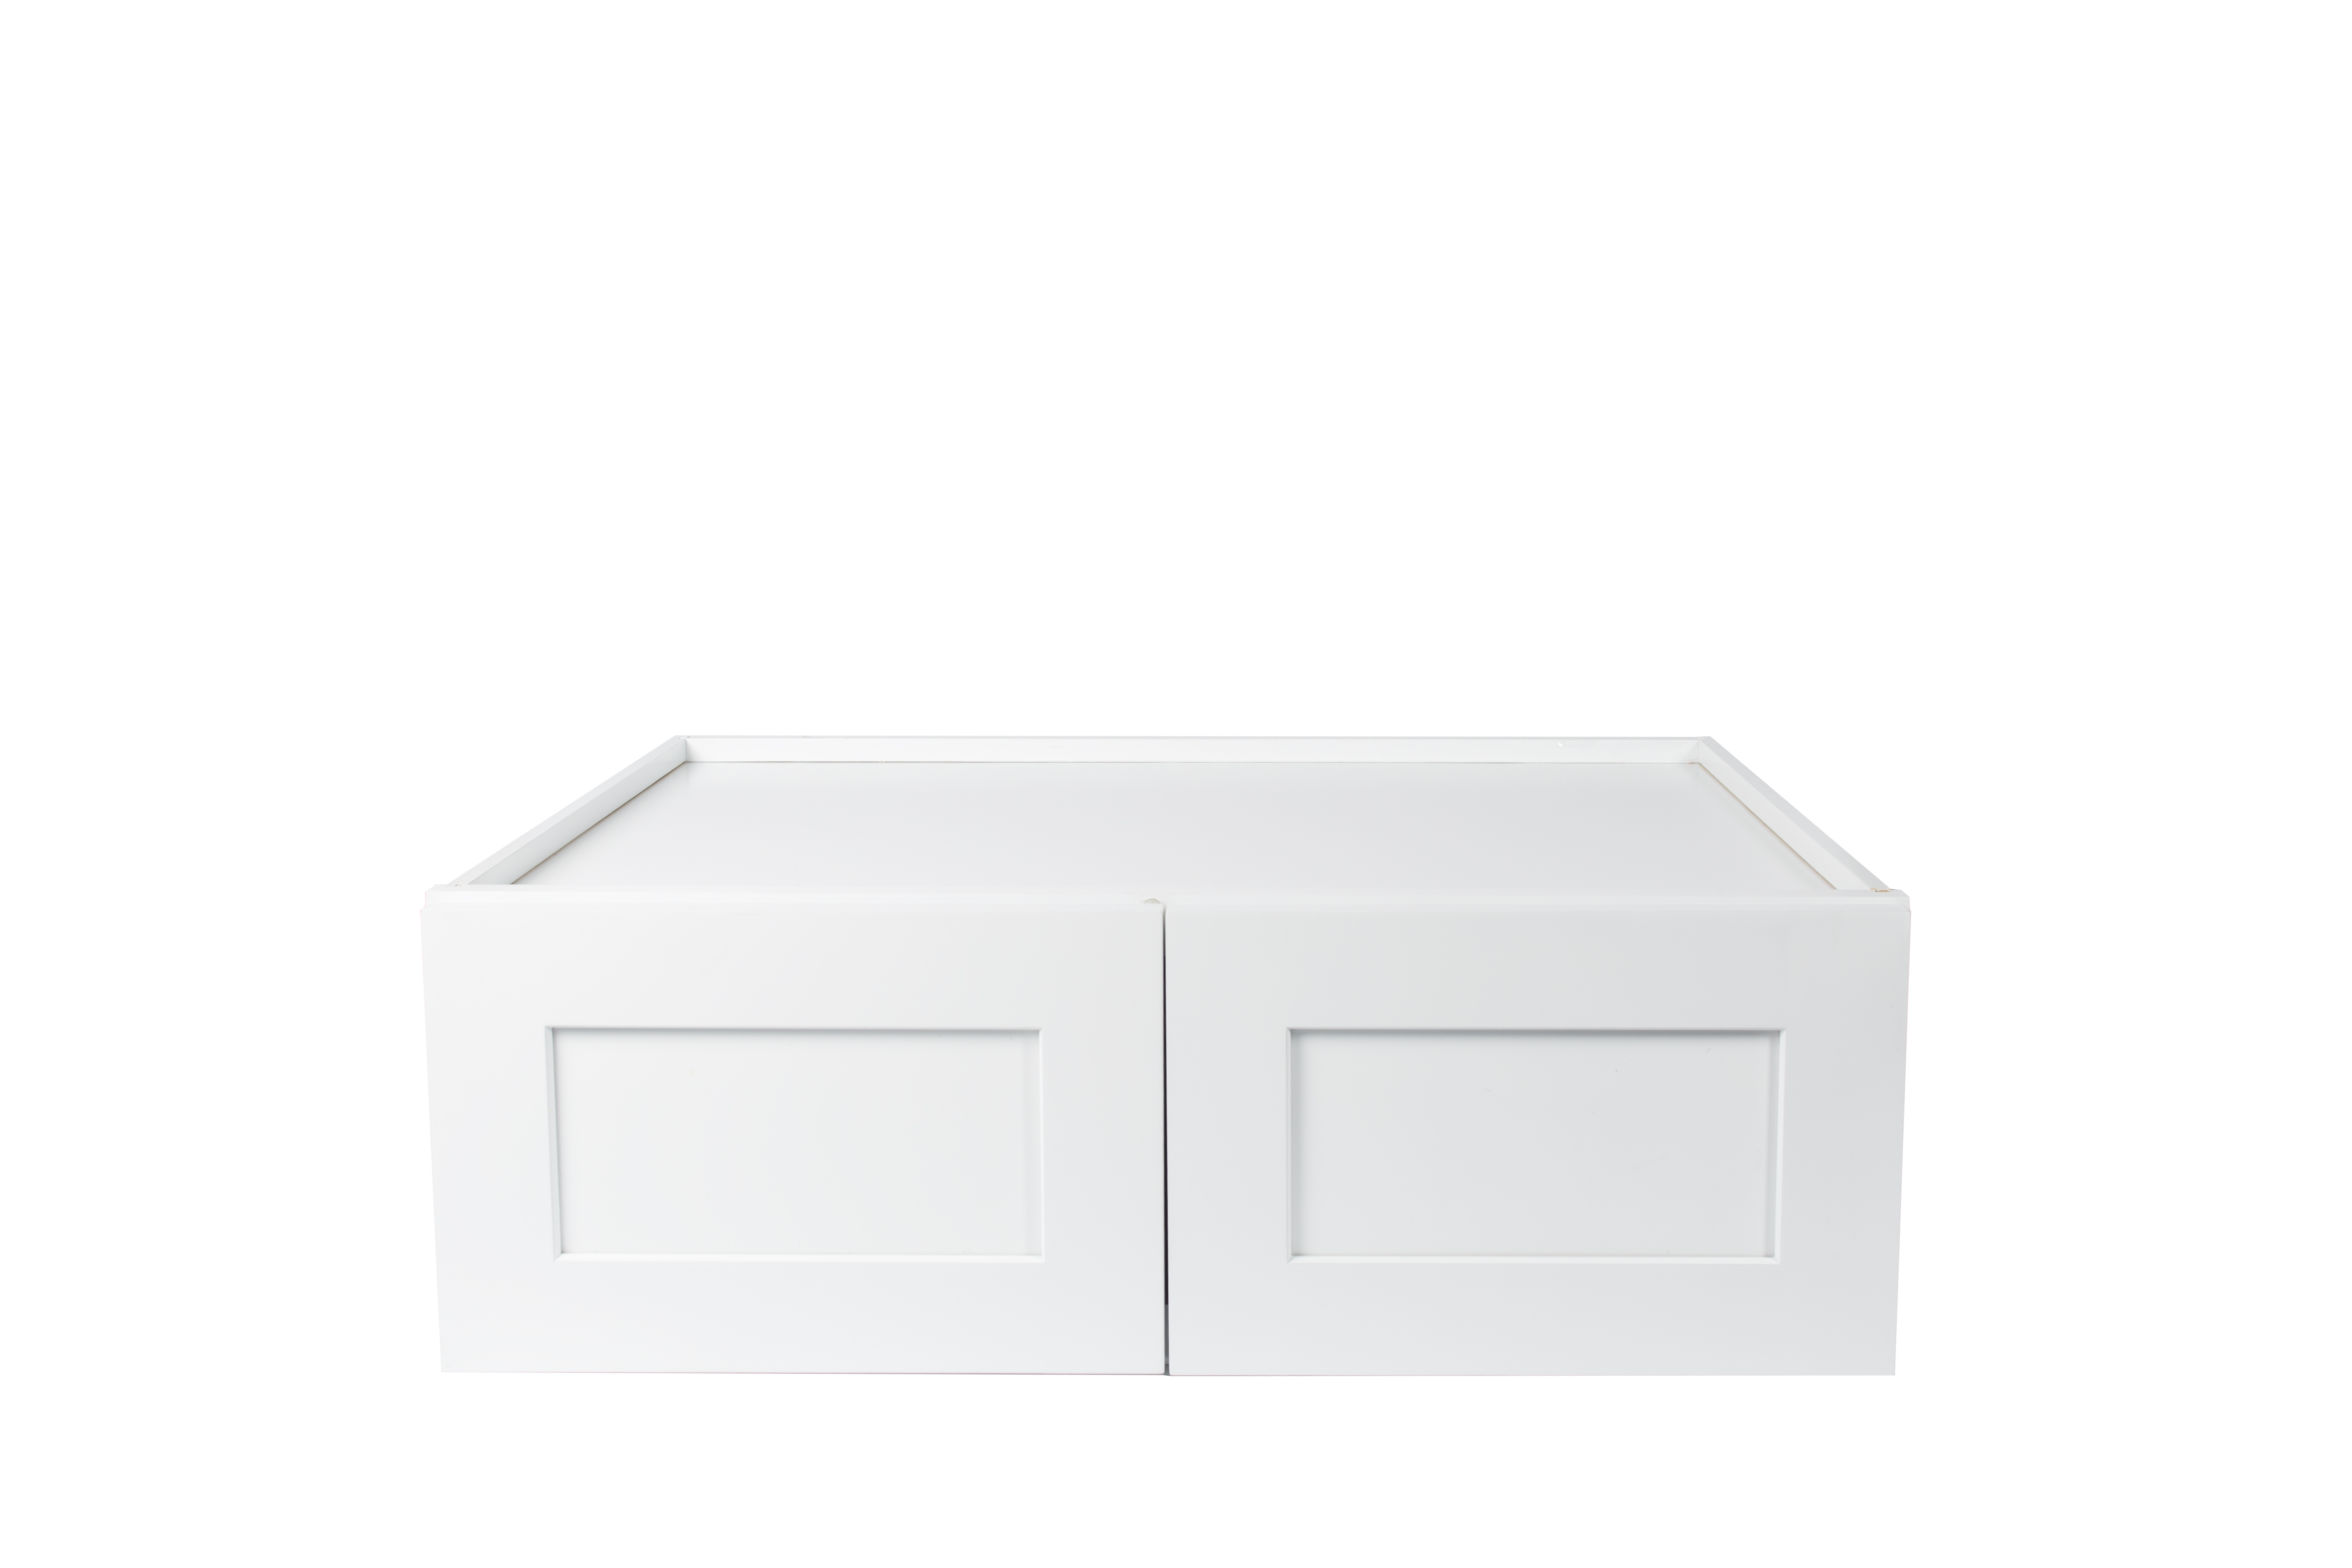 Ready to Assemble 30x18x24 in. Shaker High Double Door Wall Cabinet in White